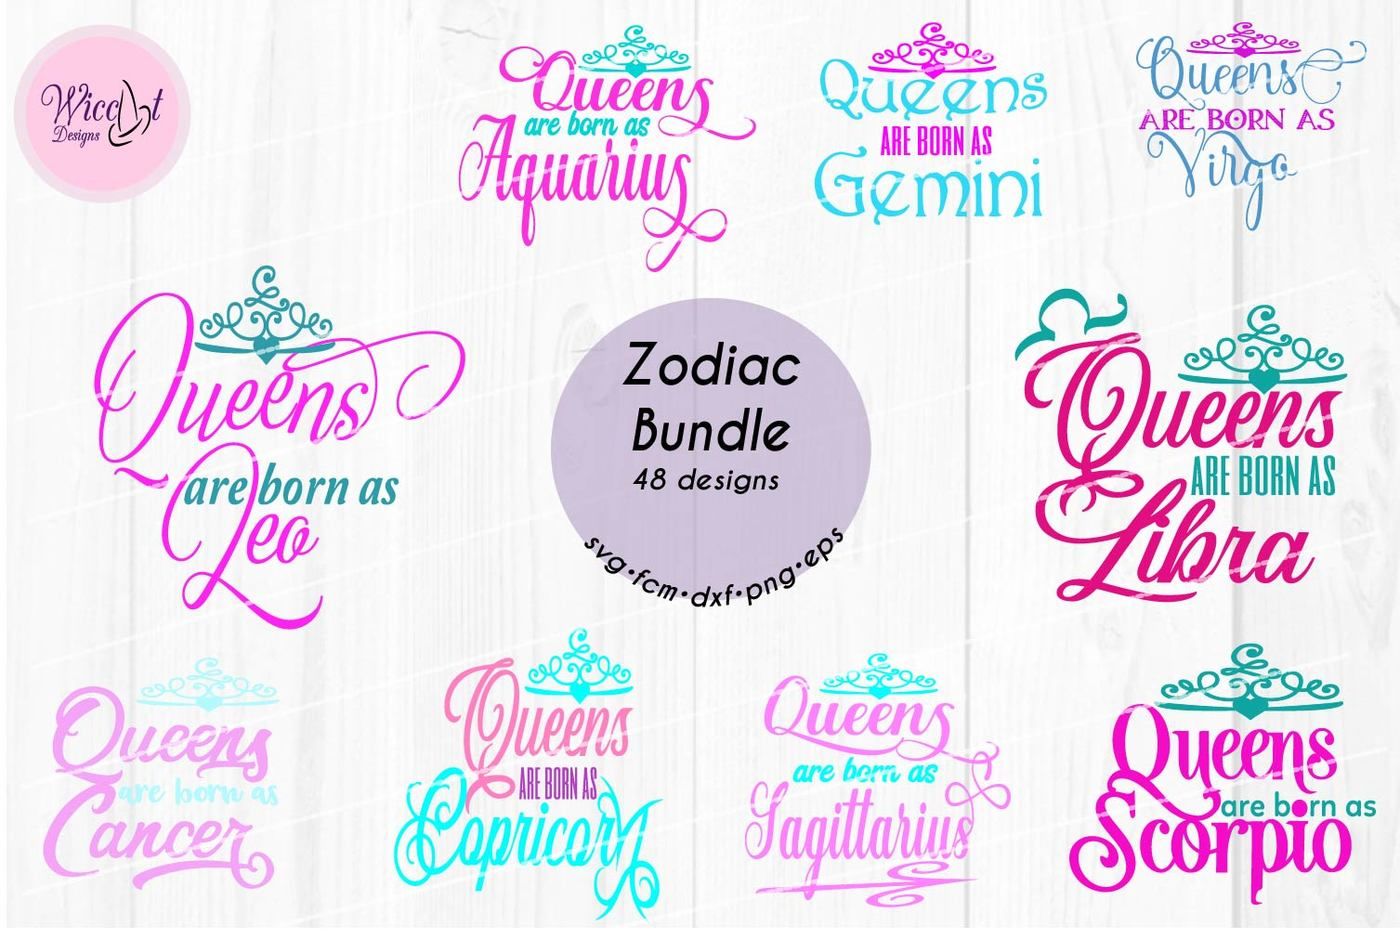 ori 3489746 6cb91a4e0d9db18309459c4f26023be0ccdfdd0c zodiac bundle svg all zodiac signs queens are born as